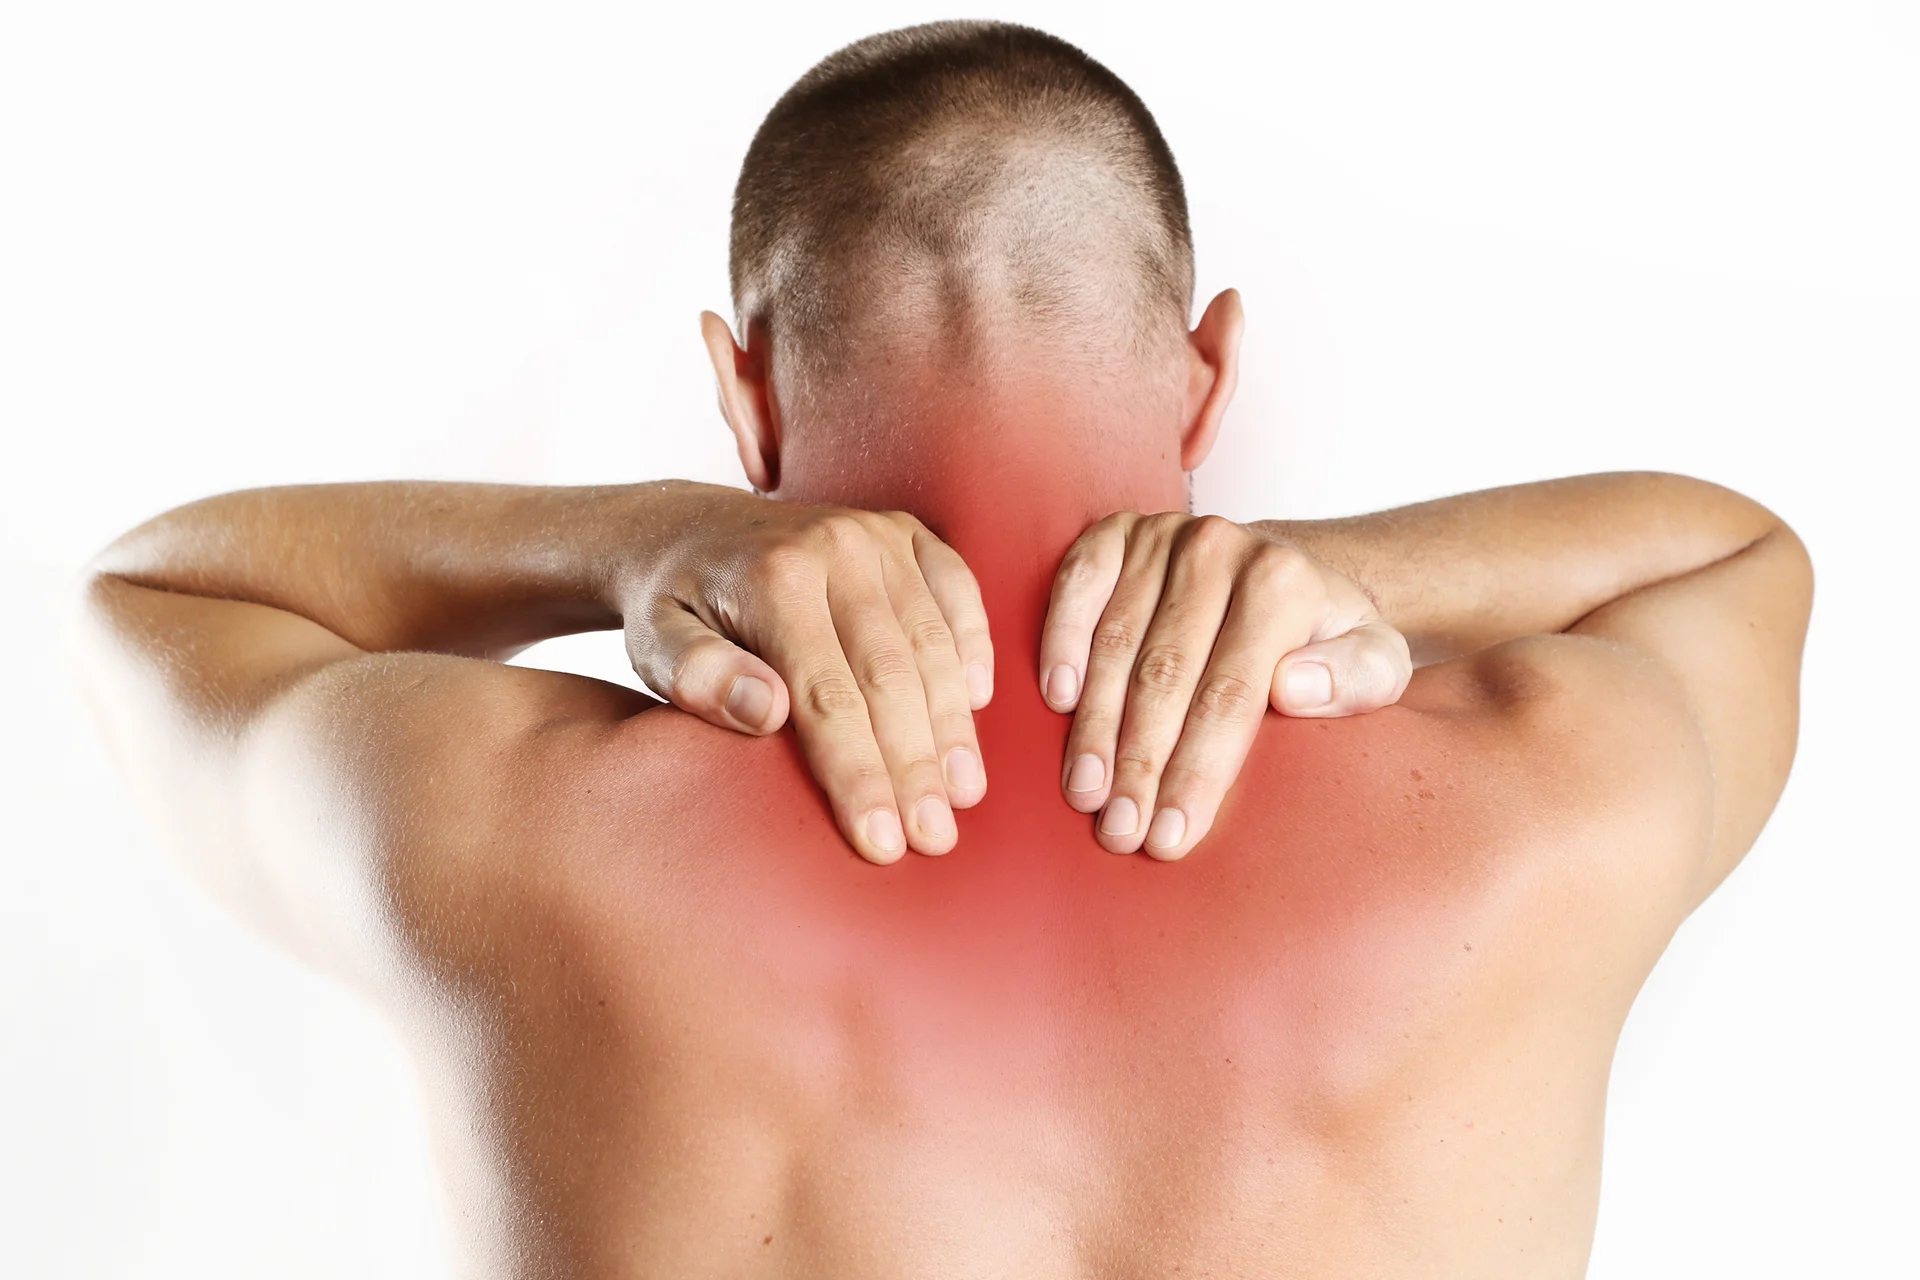 6 Effective Acupressure Points for Instant Back Pain Relief